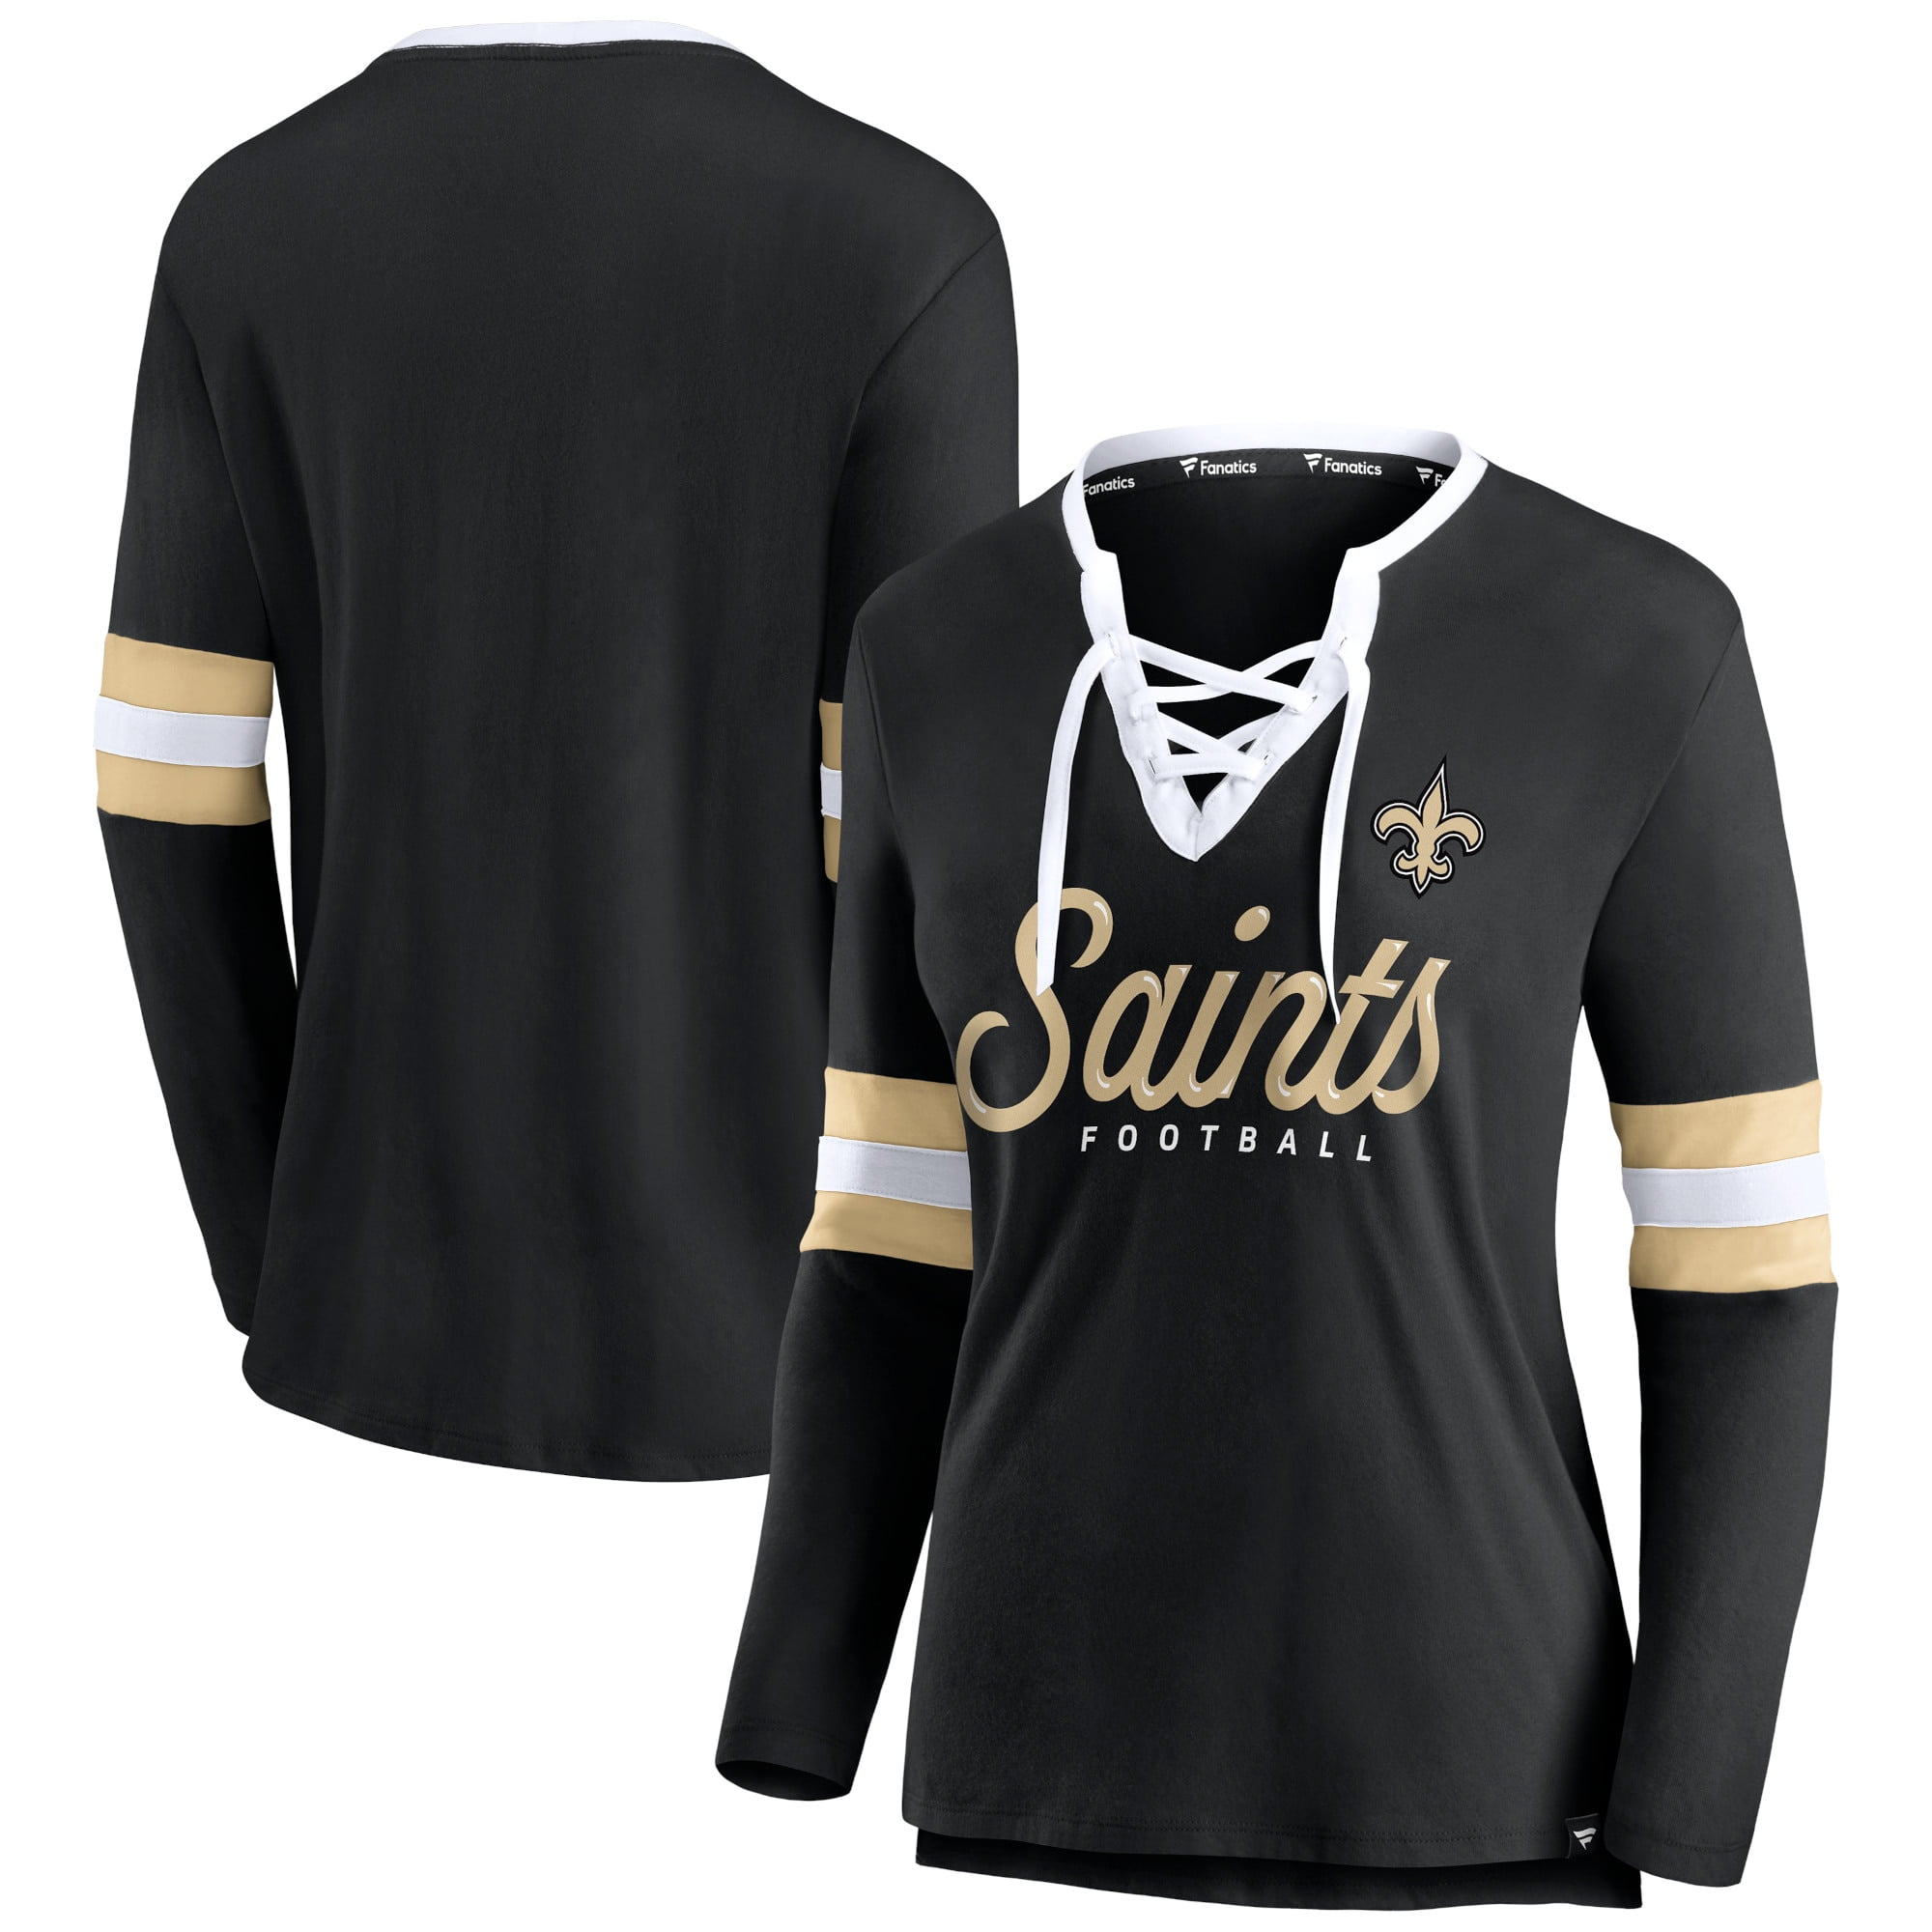 Majestic Mesh Polyester Jersey Shirt New Orleans Saints 